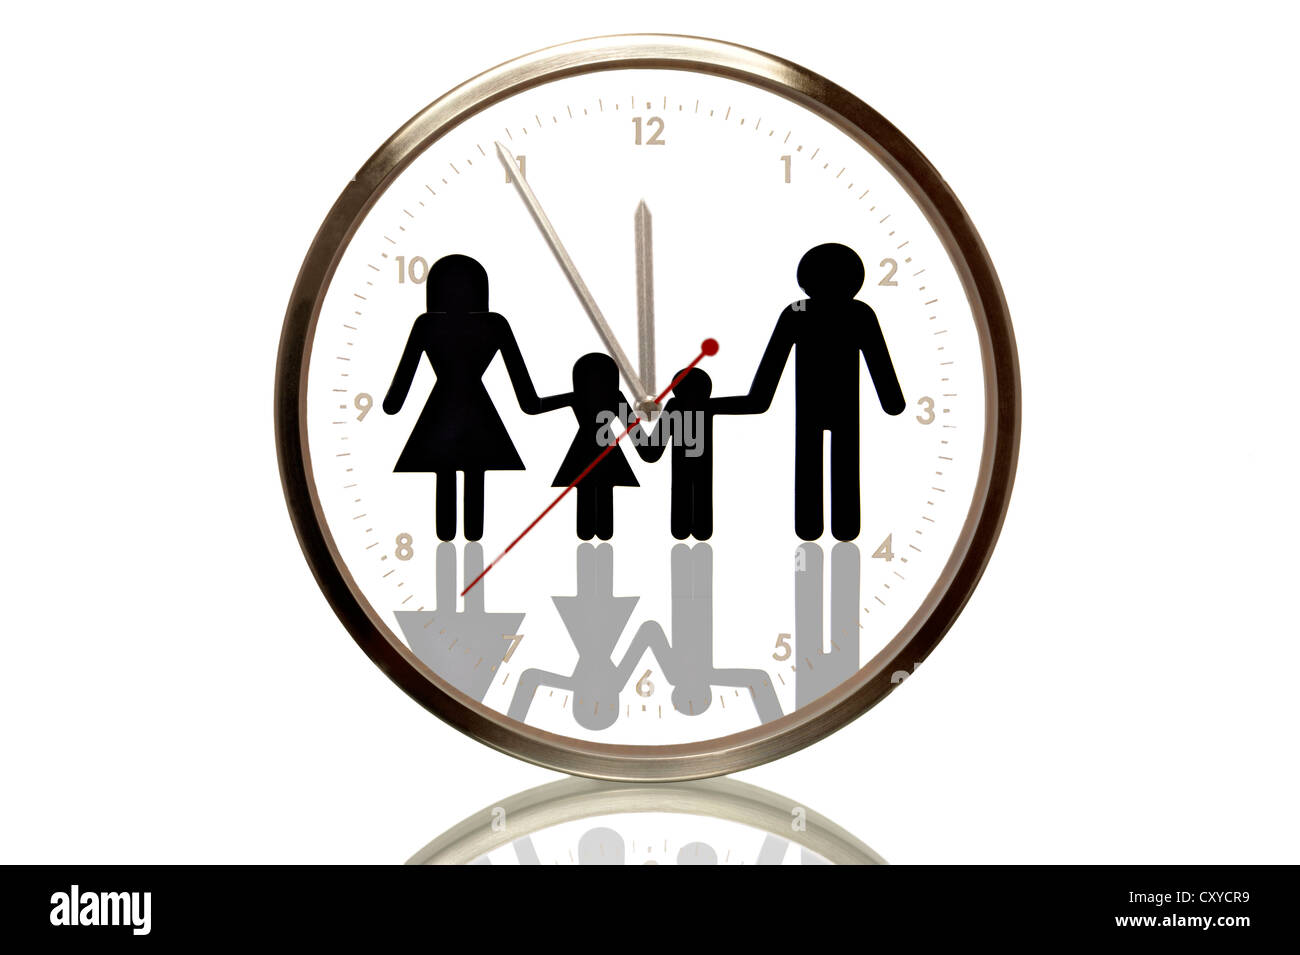 Clock with a family, 5 minutes to twelve, eleventh hour, symbolic image for demographic outlook Stock Photo